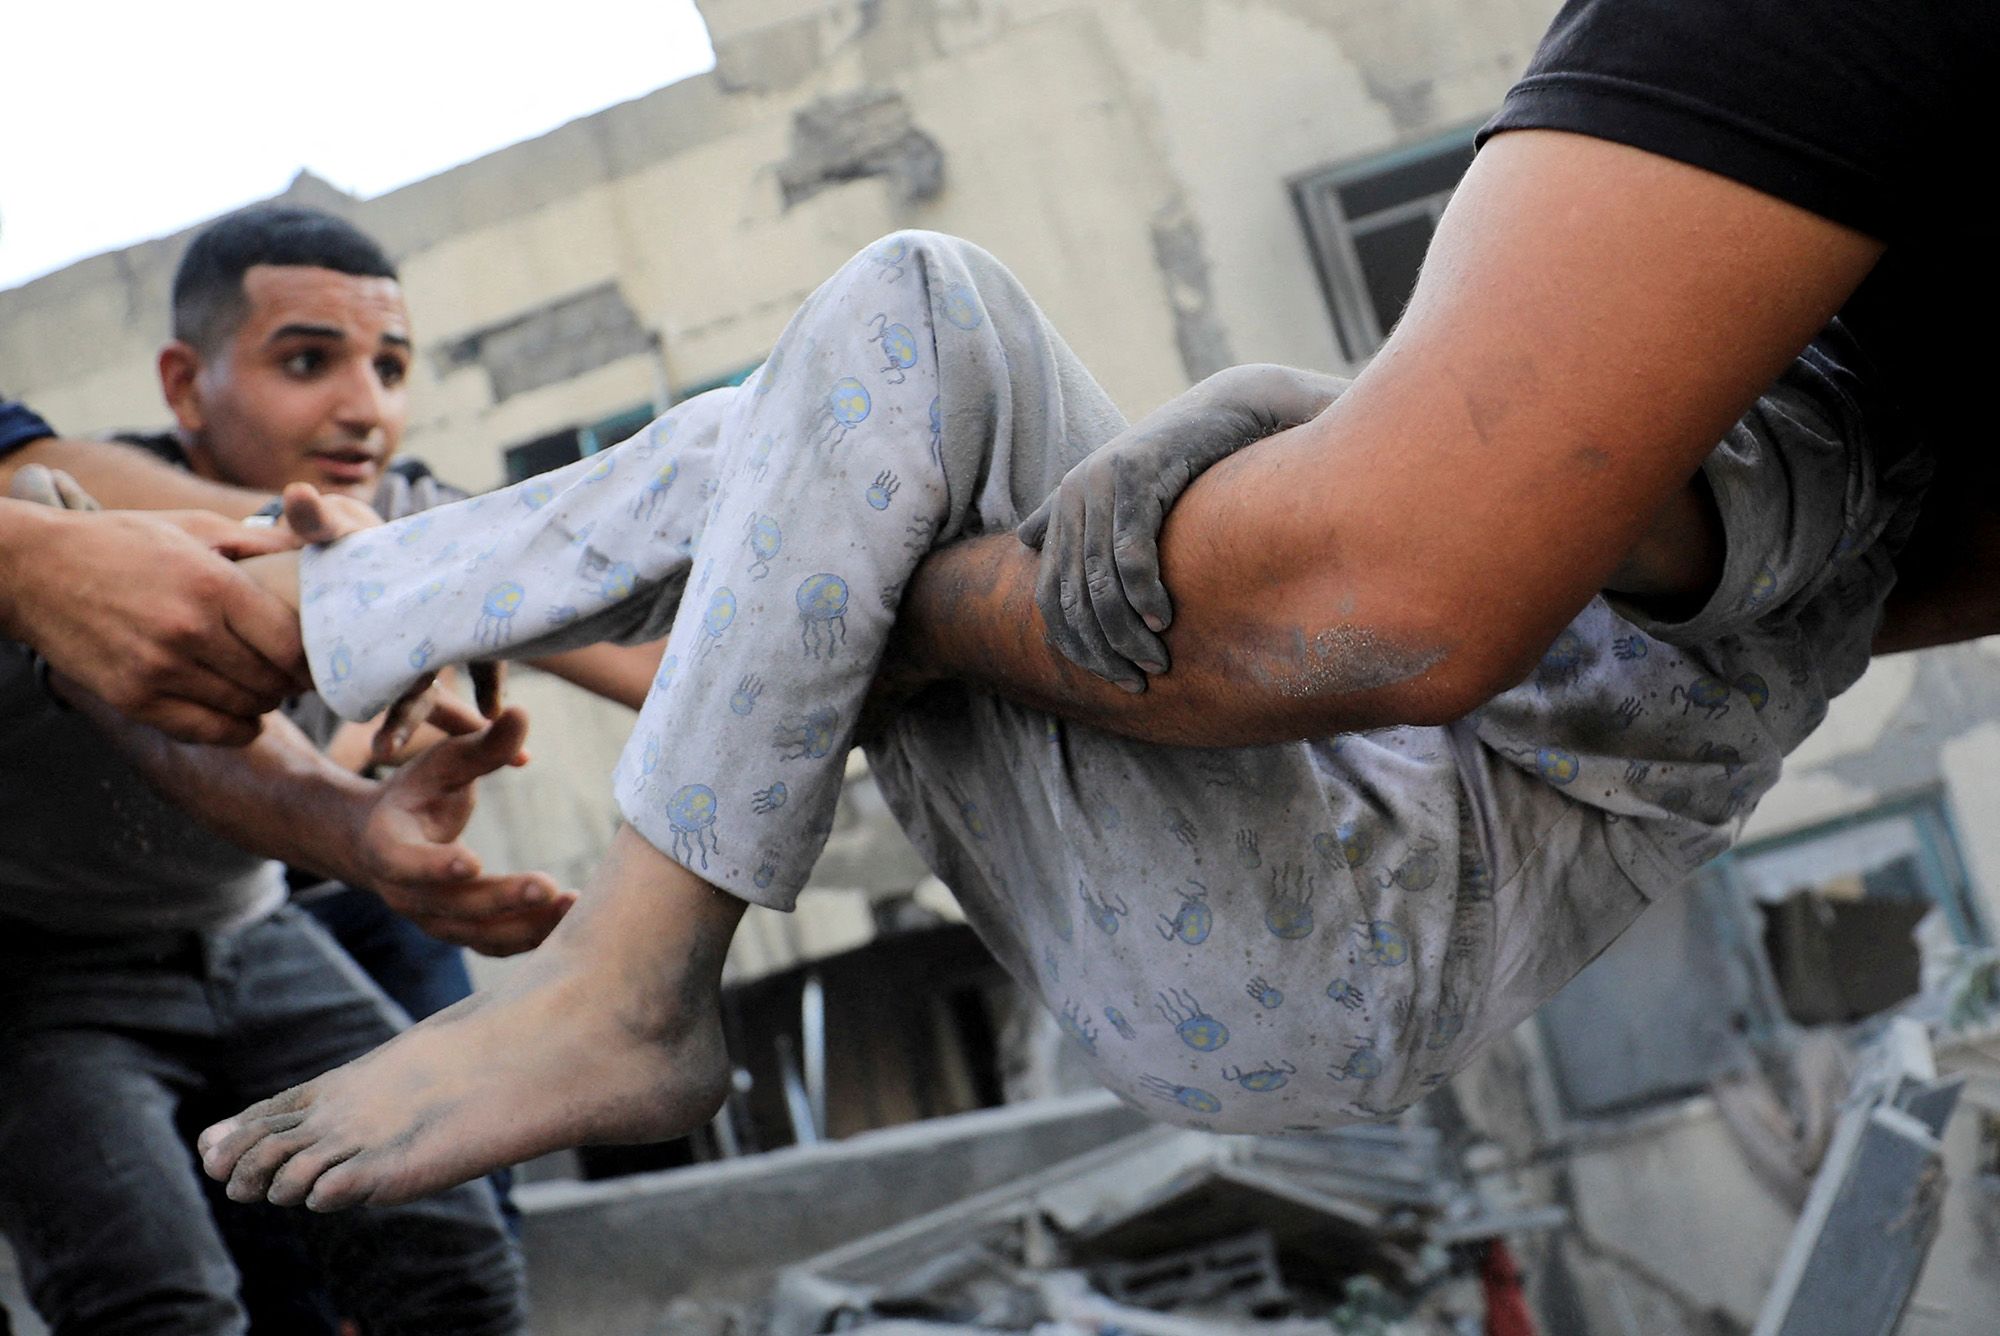 A Palestinian child is assisted as people search for casualties at the site of an Israeli strike on a residential building in Gaza City on Wednesday, October 25.